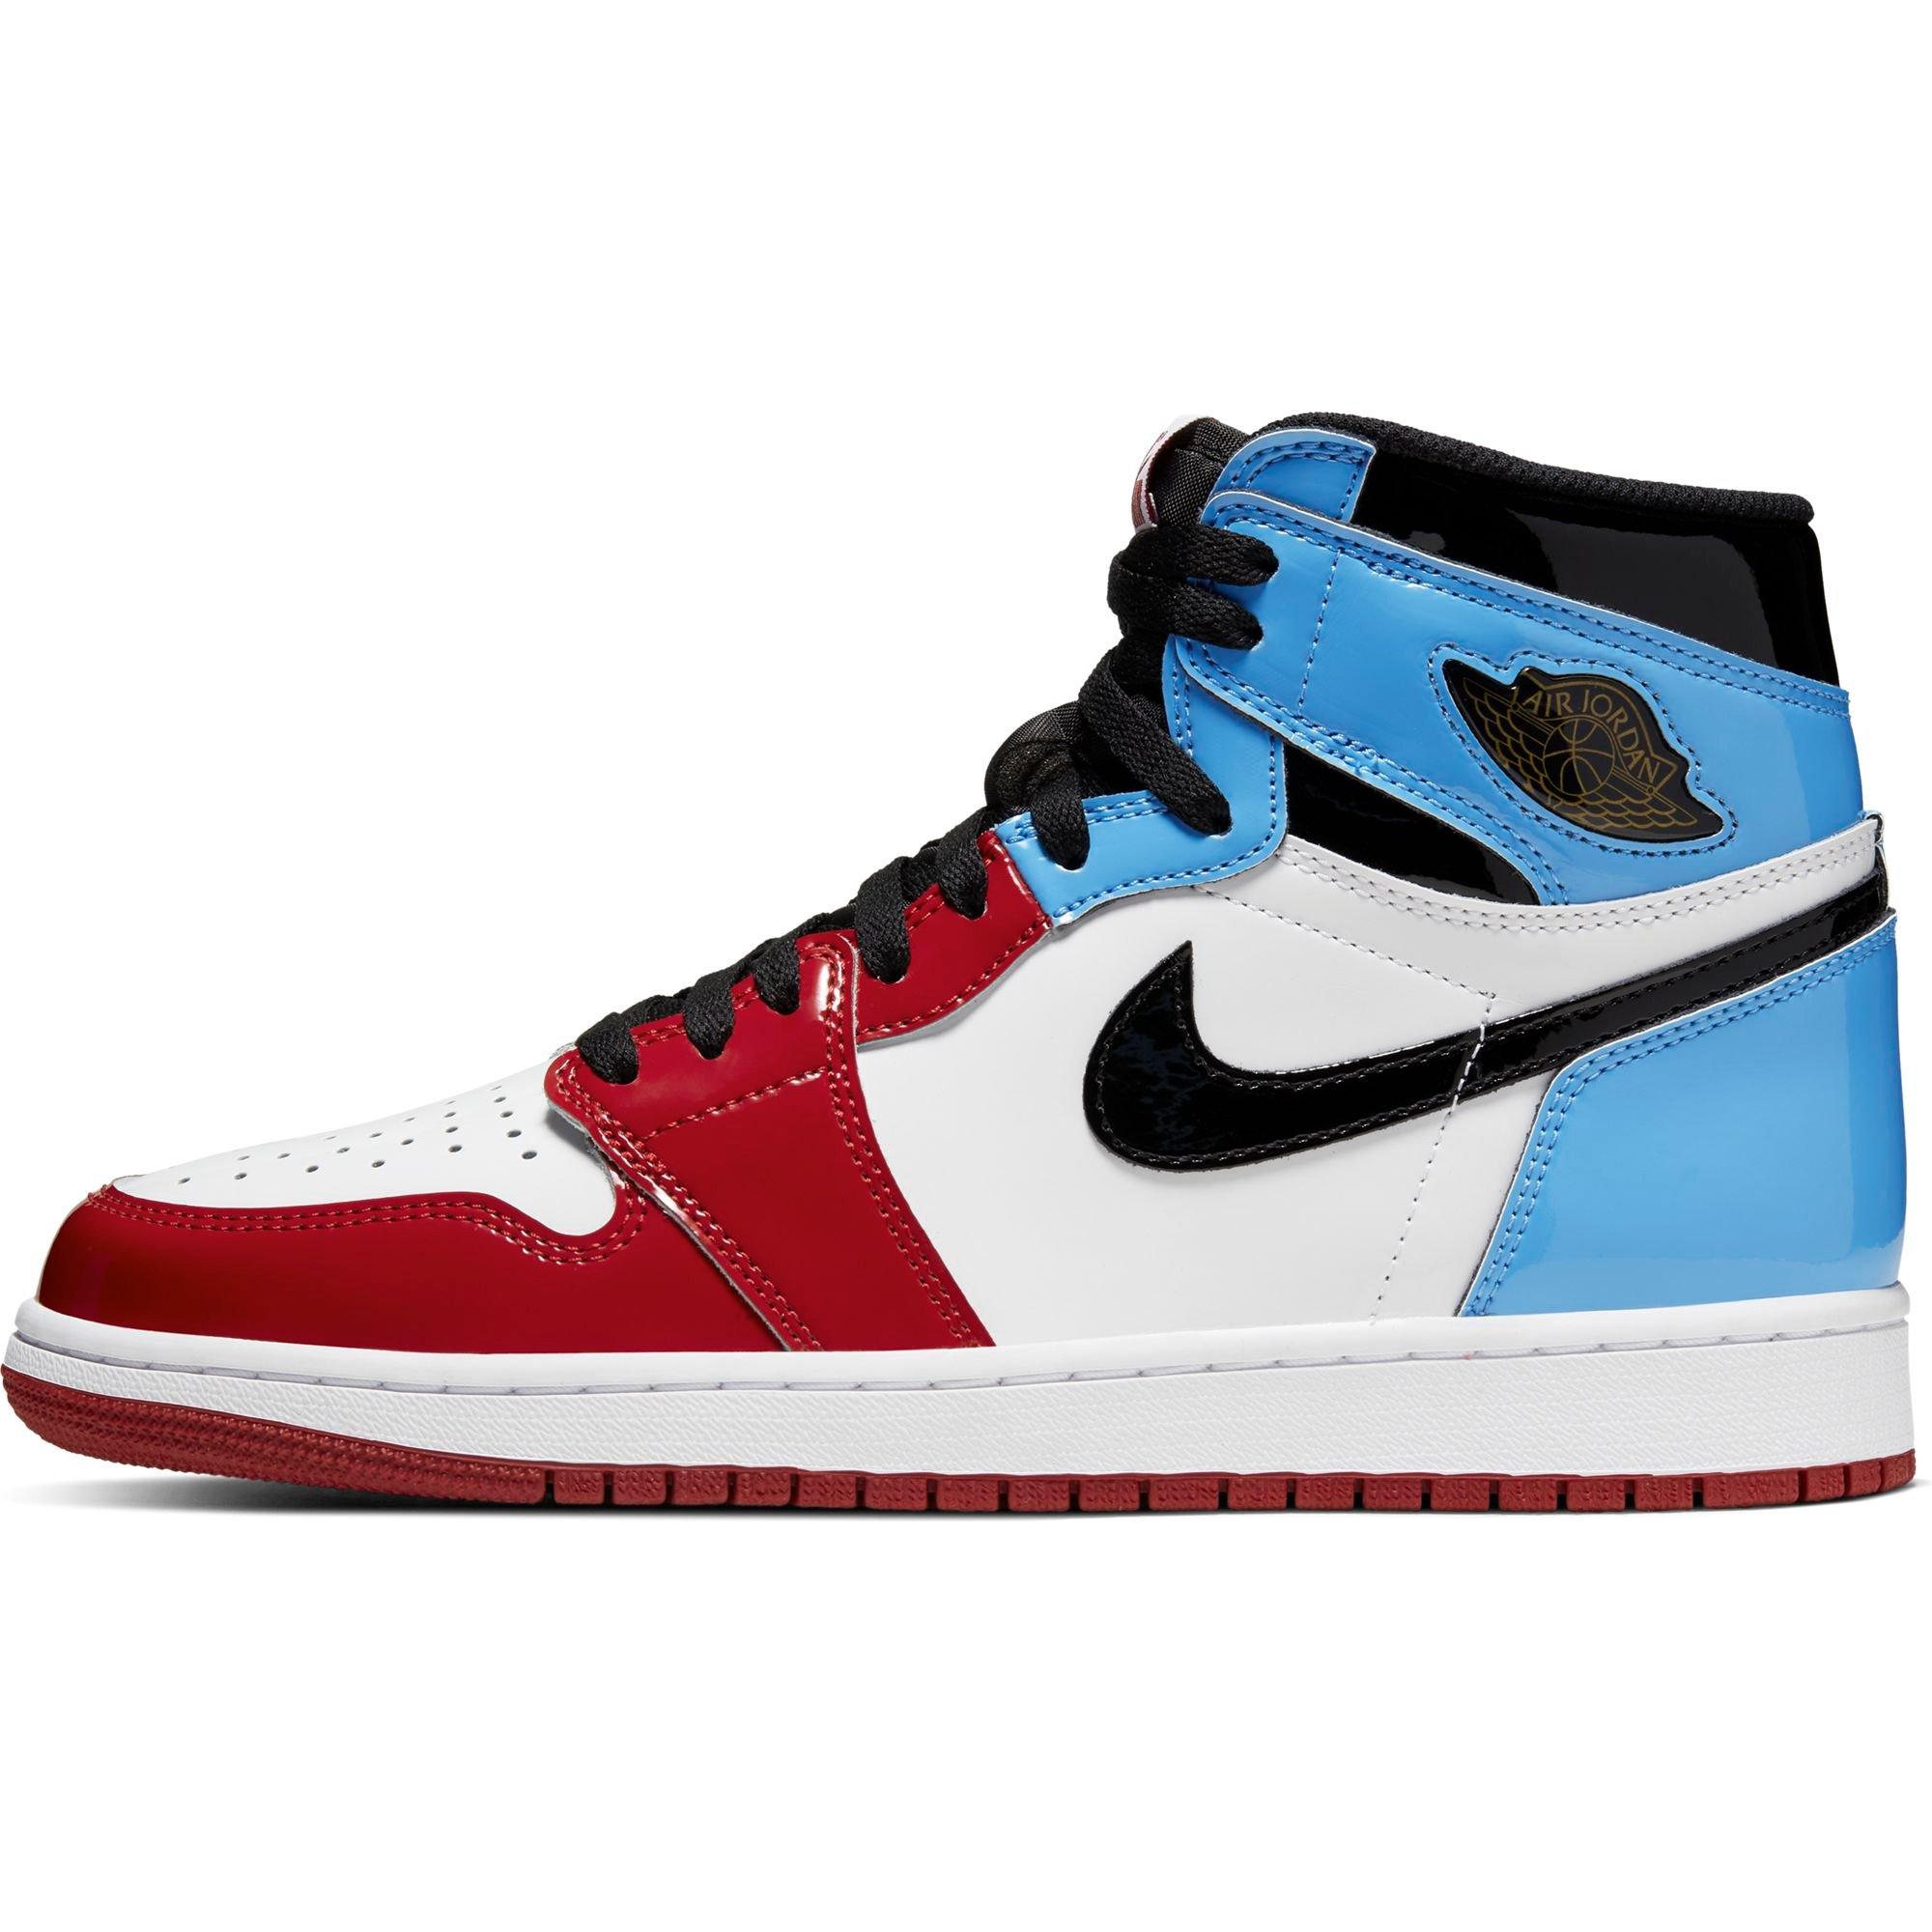 retro 1 blue red and white